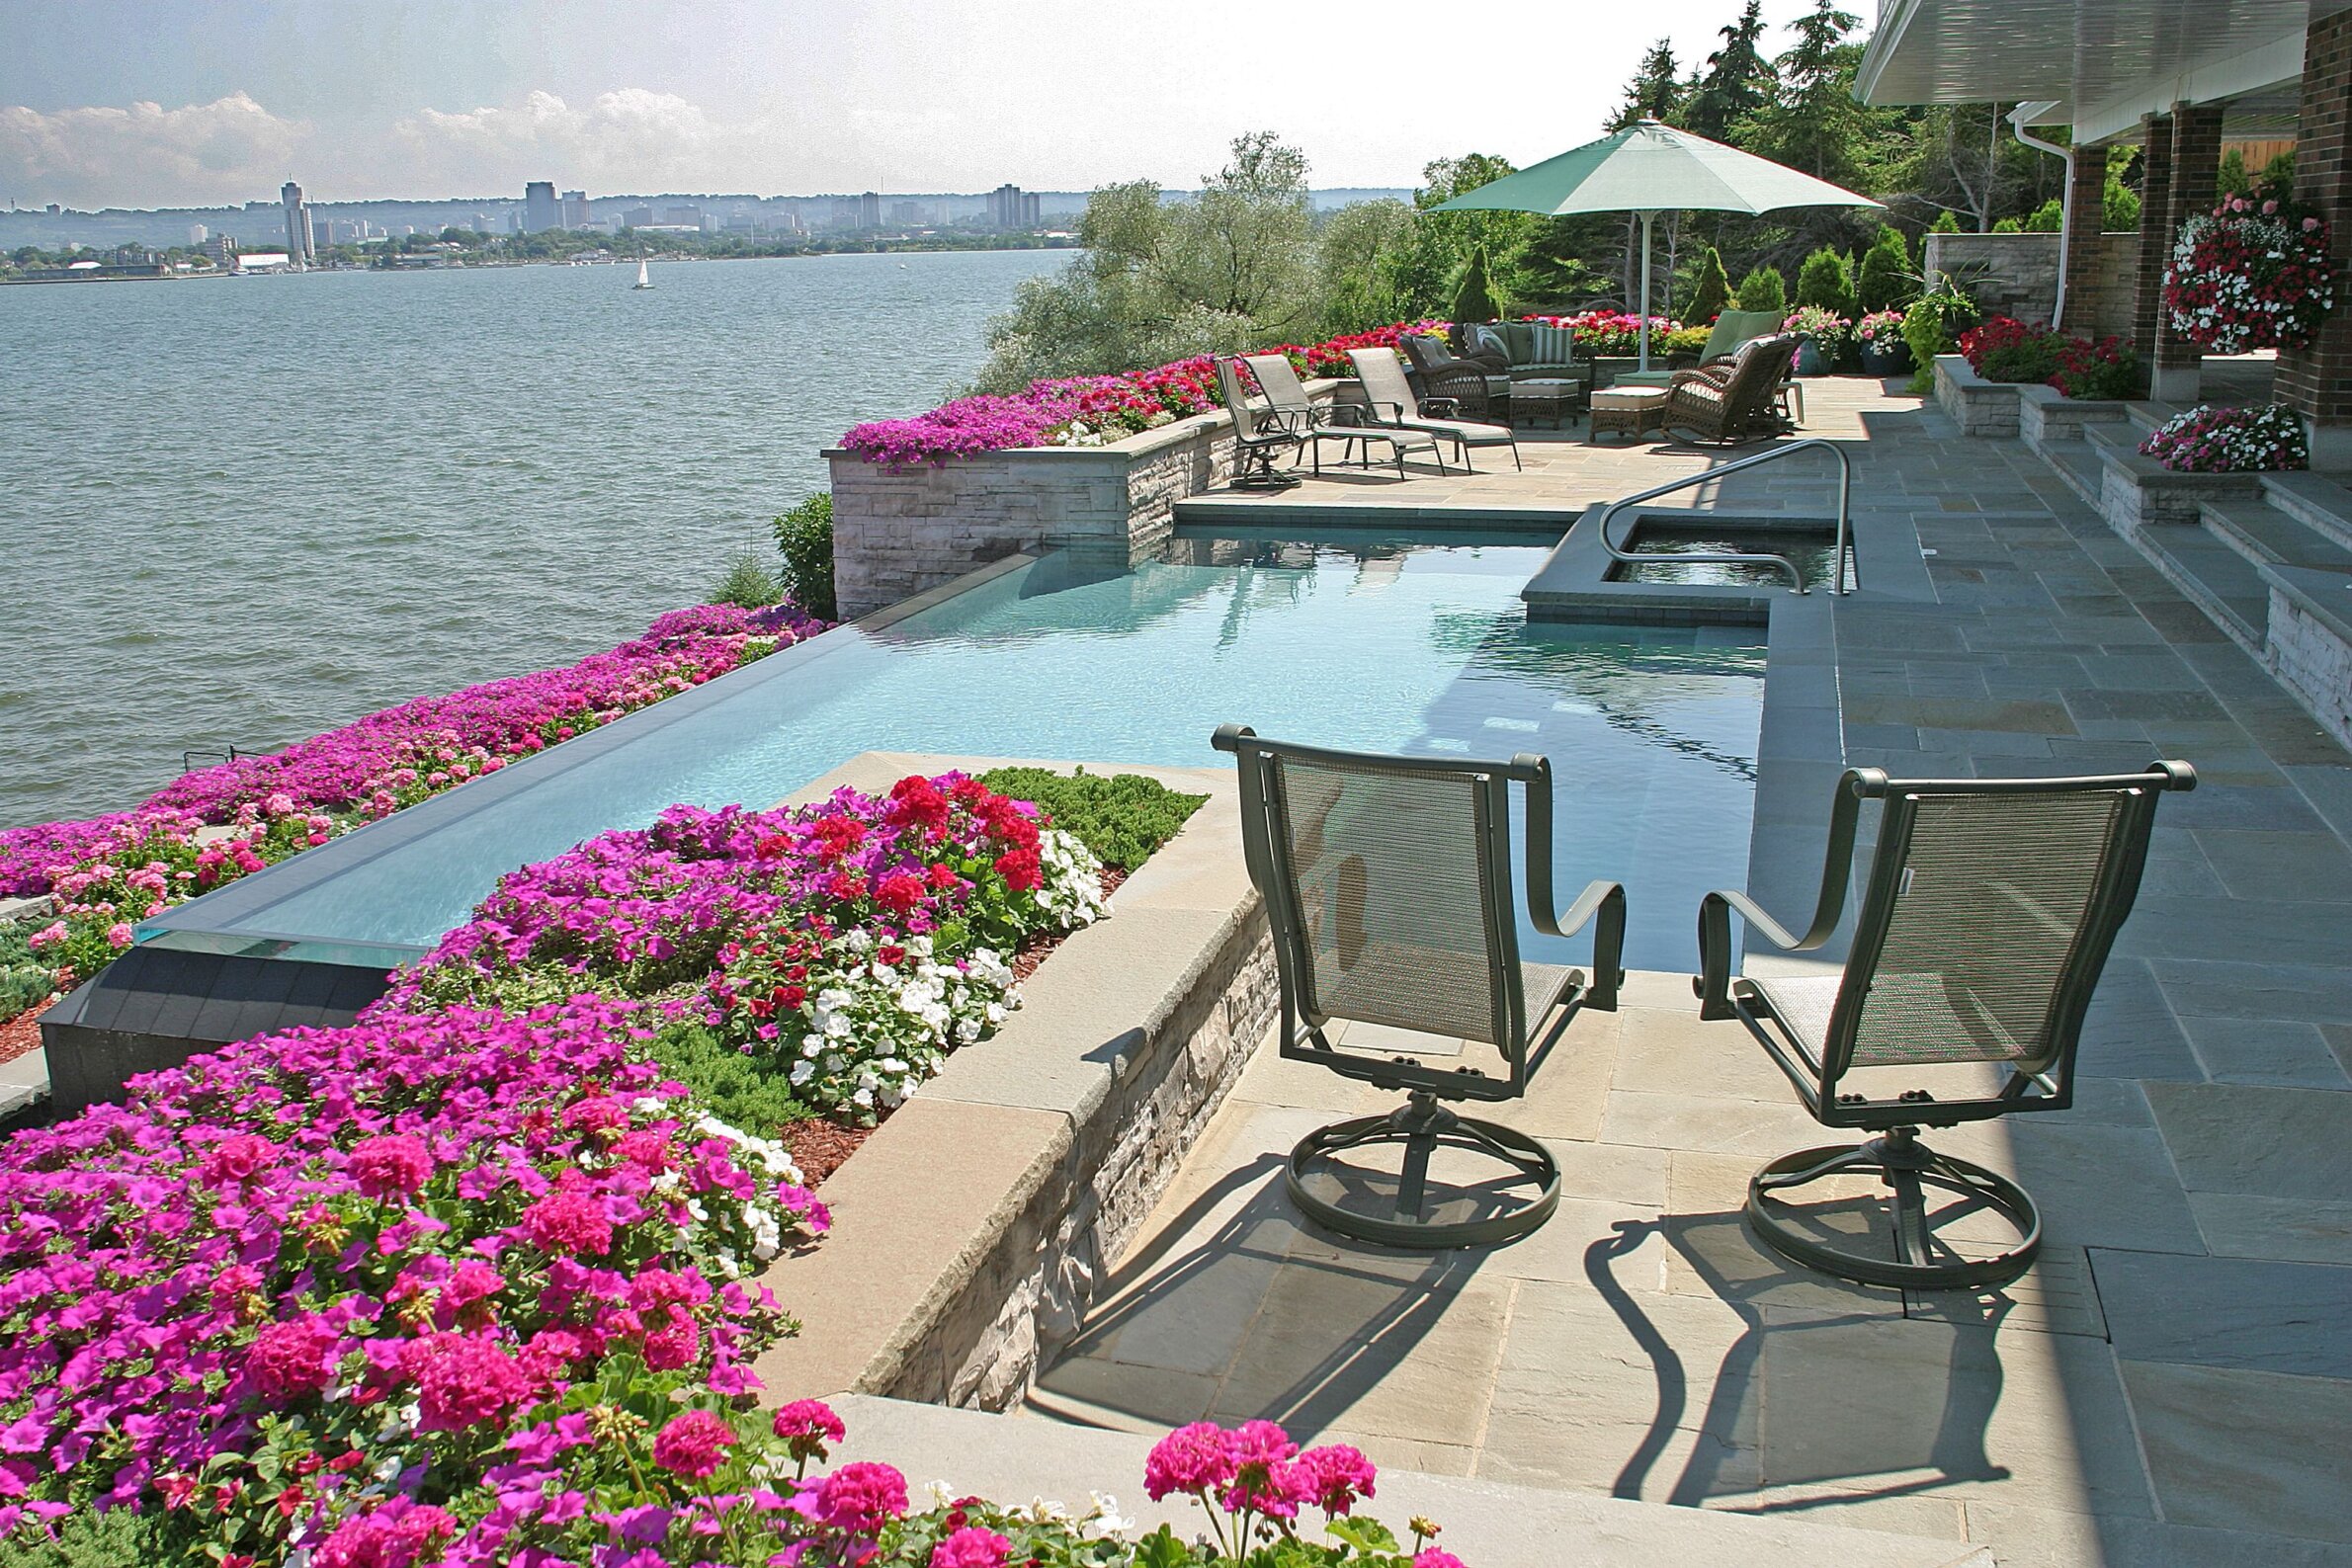 A luxurious outdoor pool area with abundant flowers, patio furniture, and a scenic waterfront view under a sunny sky.